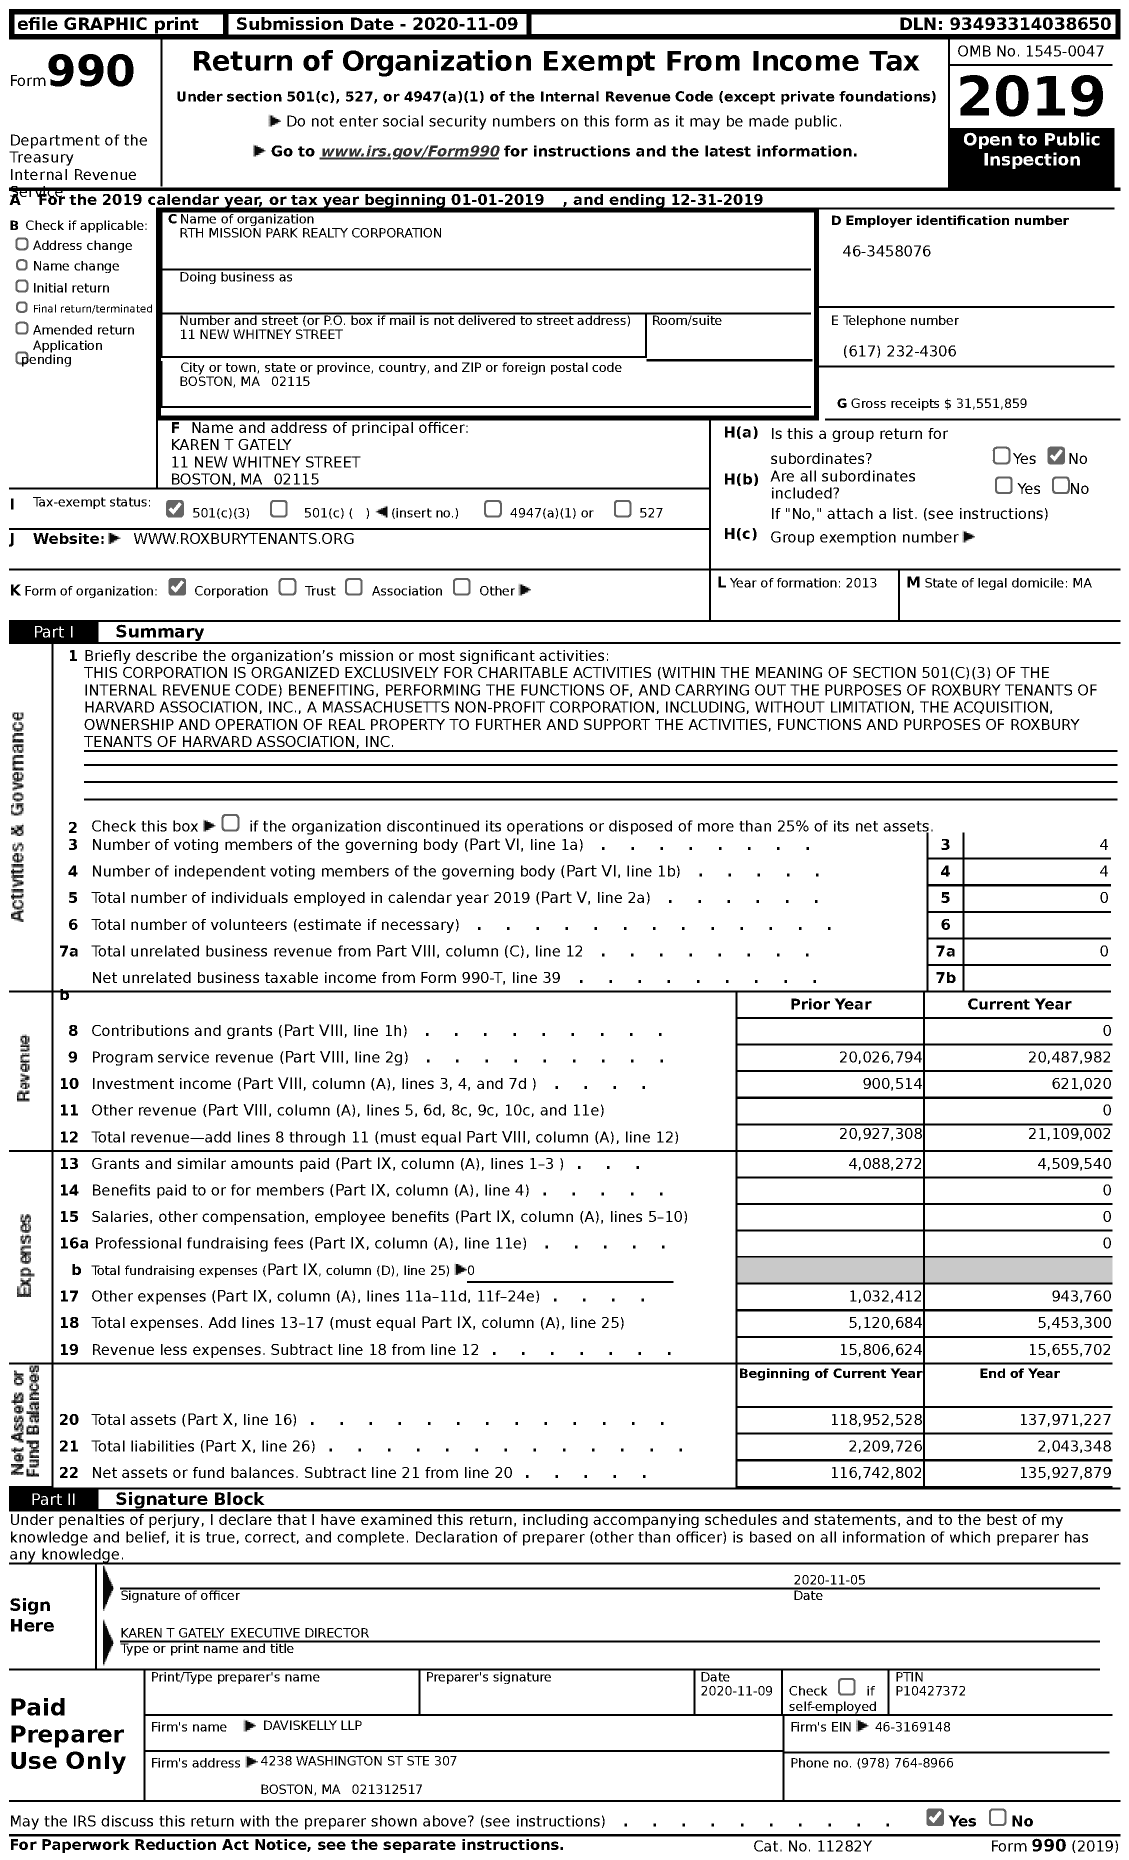 Image of first page of 2019 Form 990 for RTH Mission Park Realty Corporation